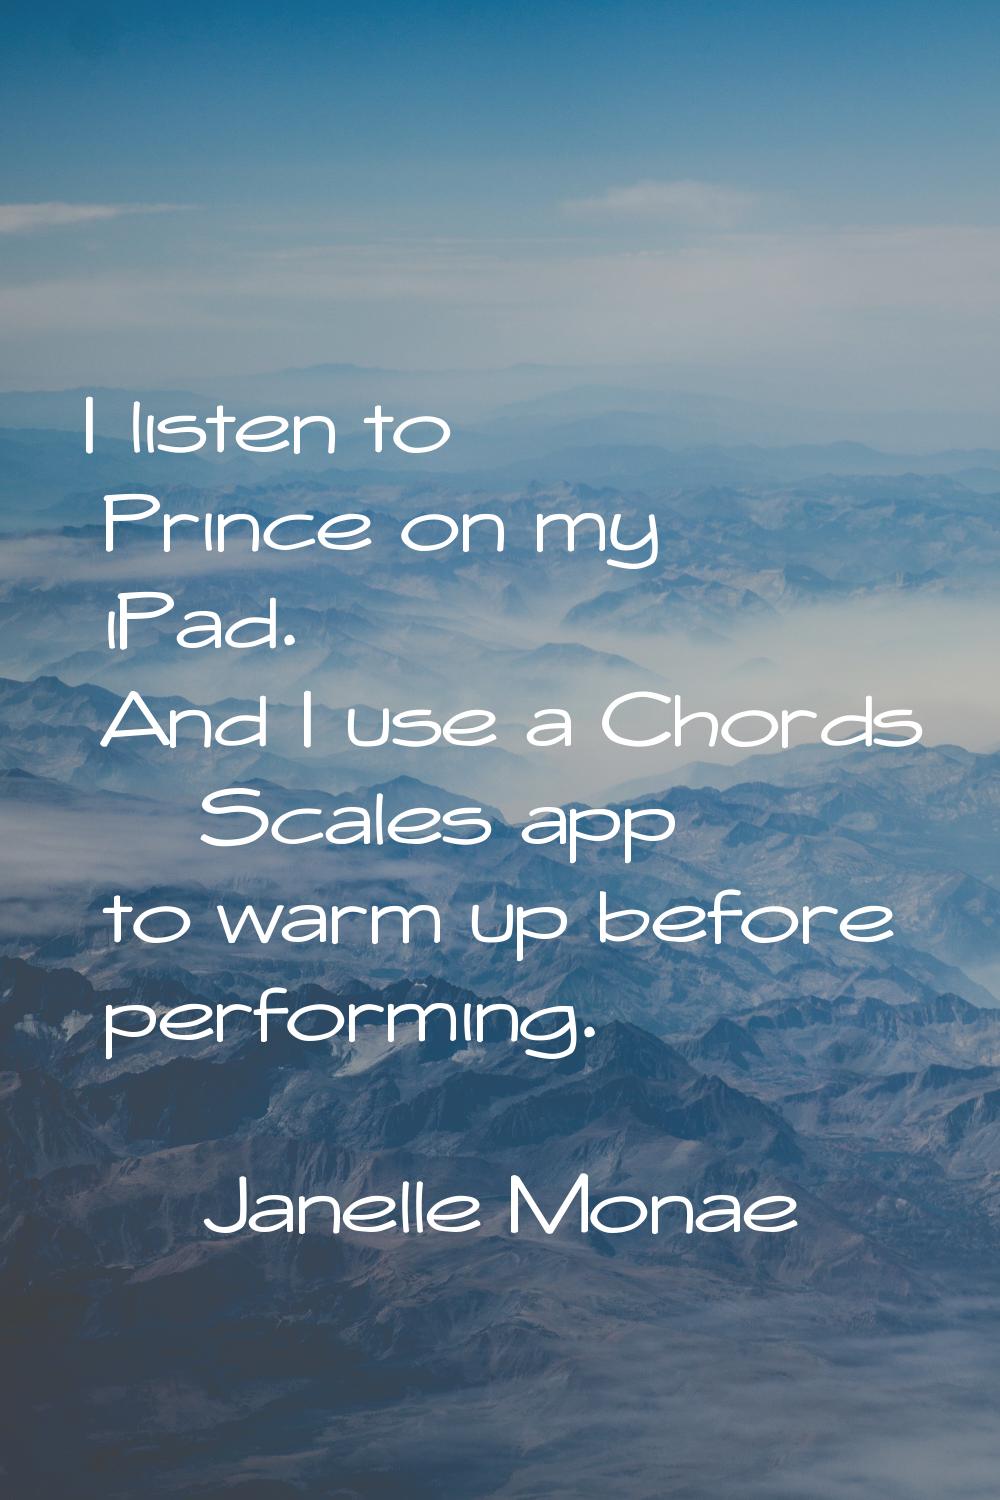 I listen to Prince on my iPad. And I use a Chords & Scales app to warm up before performing.